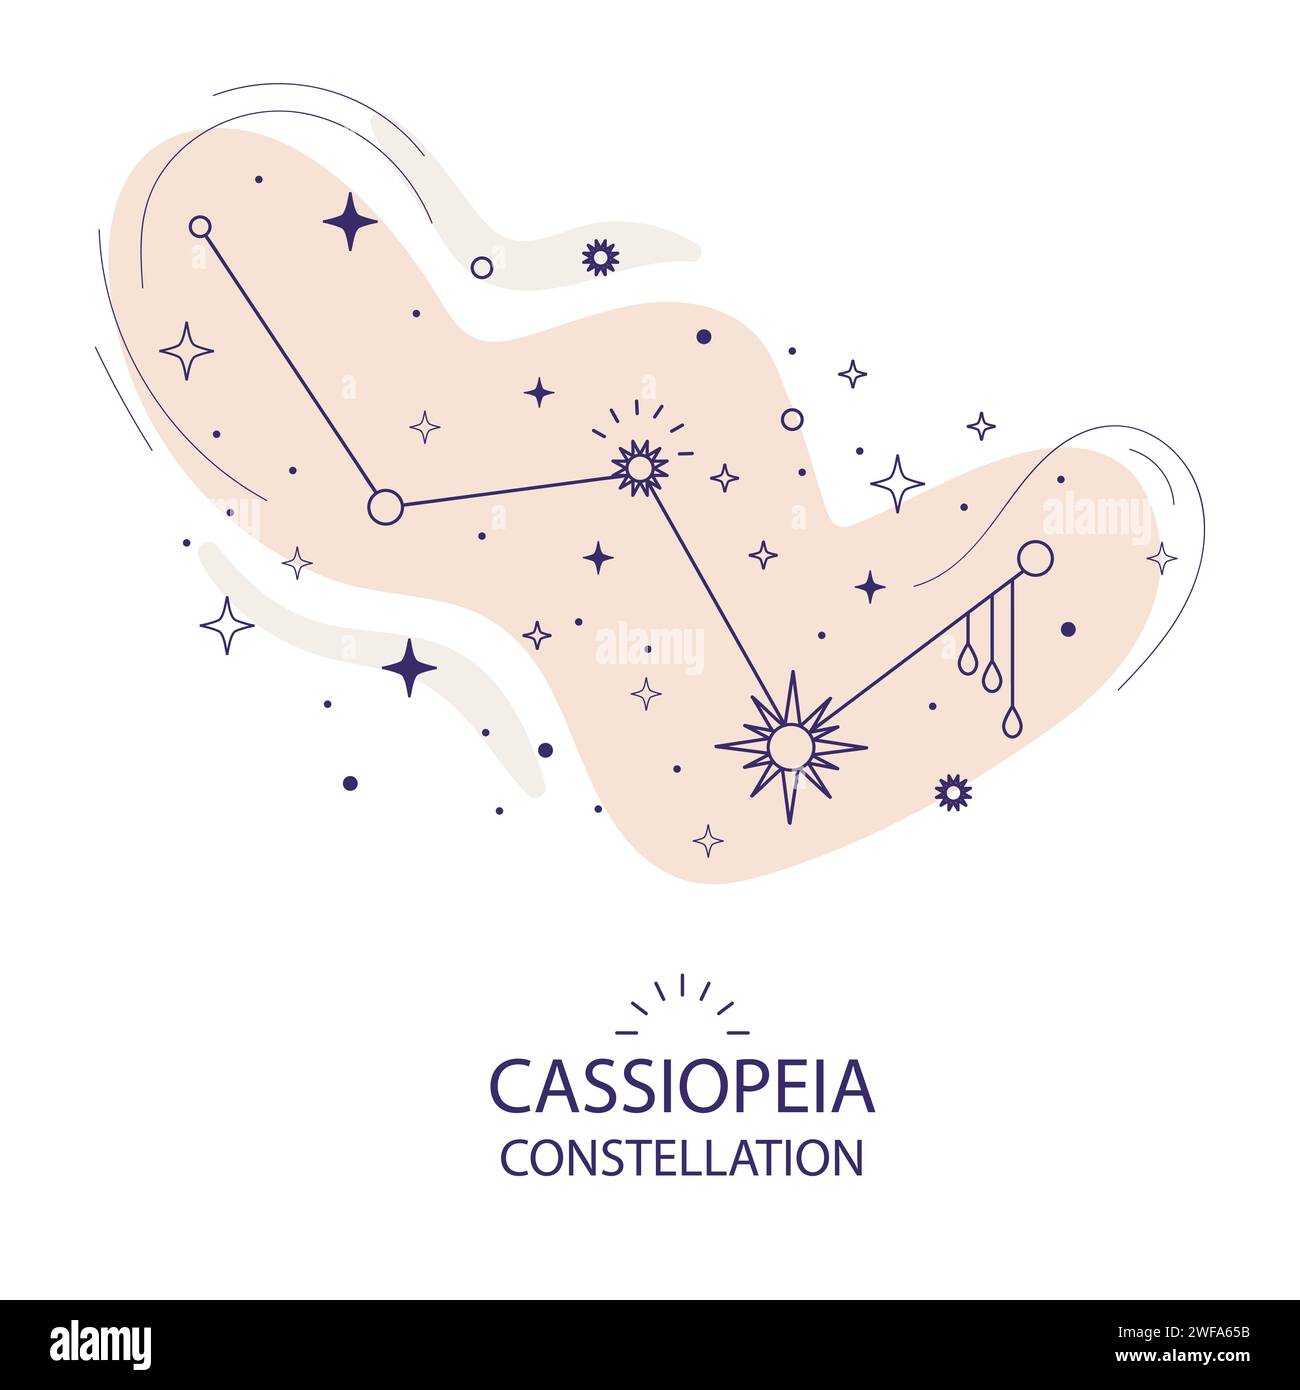 Star constellation Cassiopeia vector illustration in trendy style. Concept of astronomy. Magic astrology design. Esoteric boho background. For astrolo Stock Vector